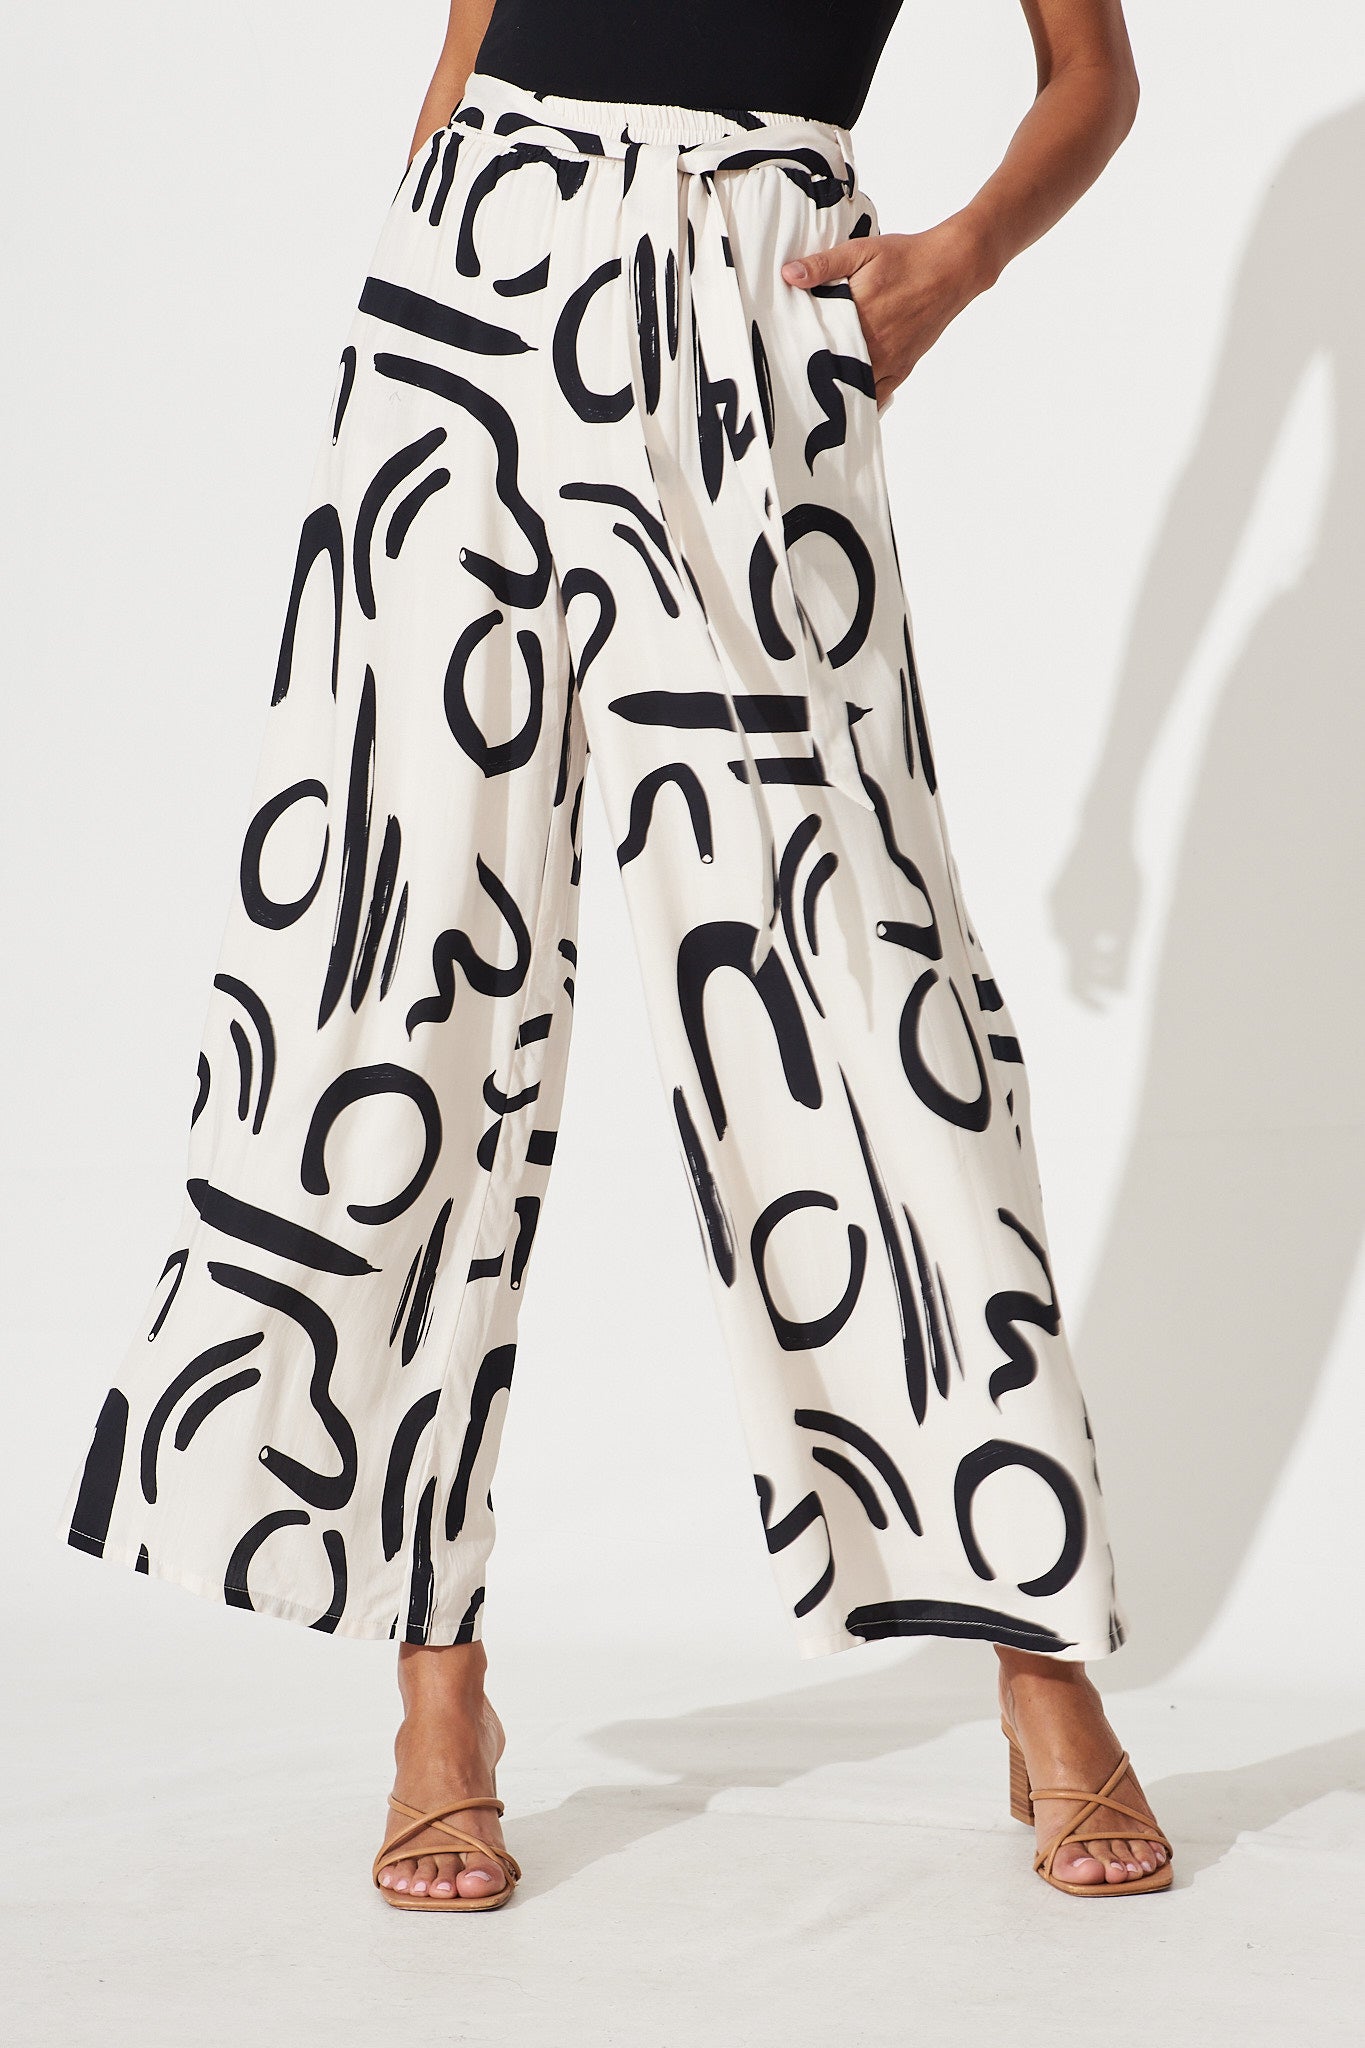 Mackillop Pant In Cream With Black Swirl Print Linen Blend - front